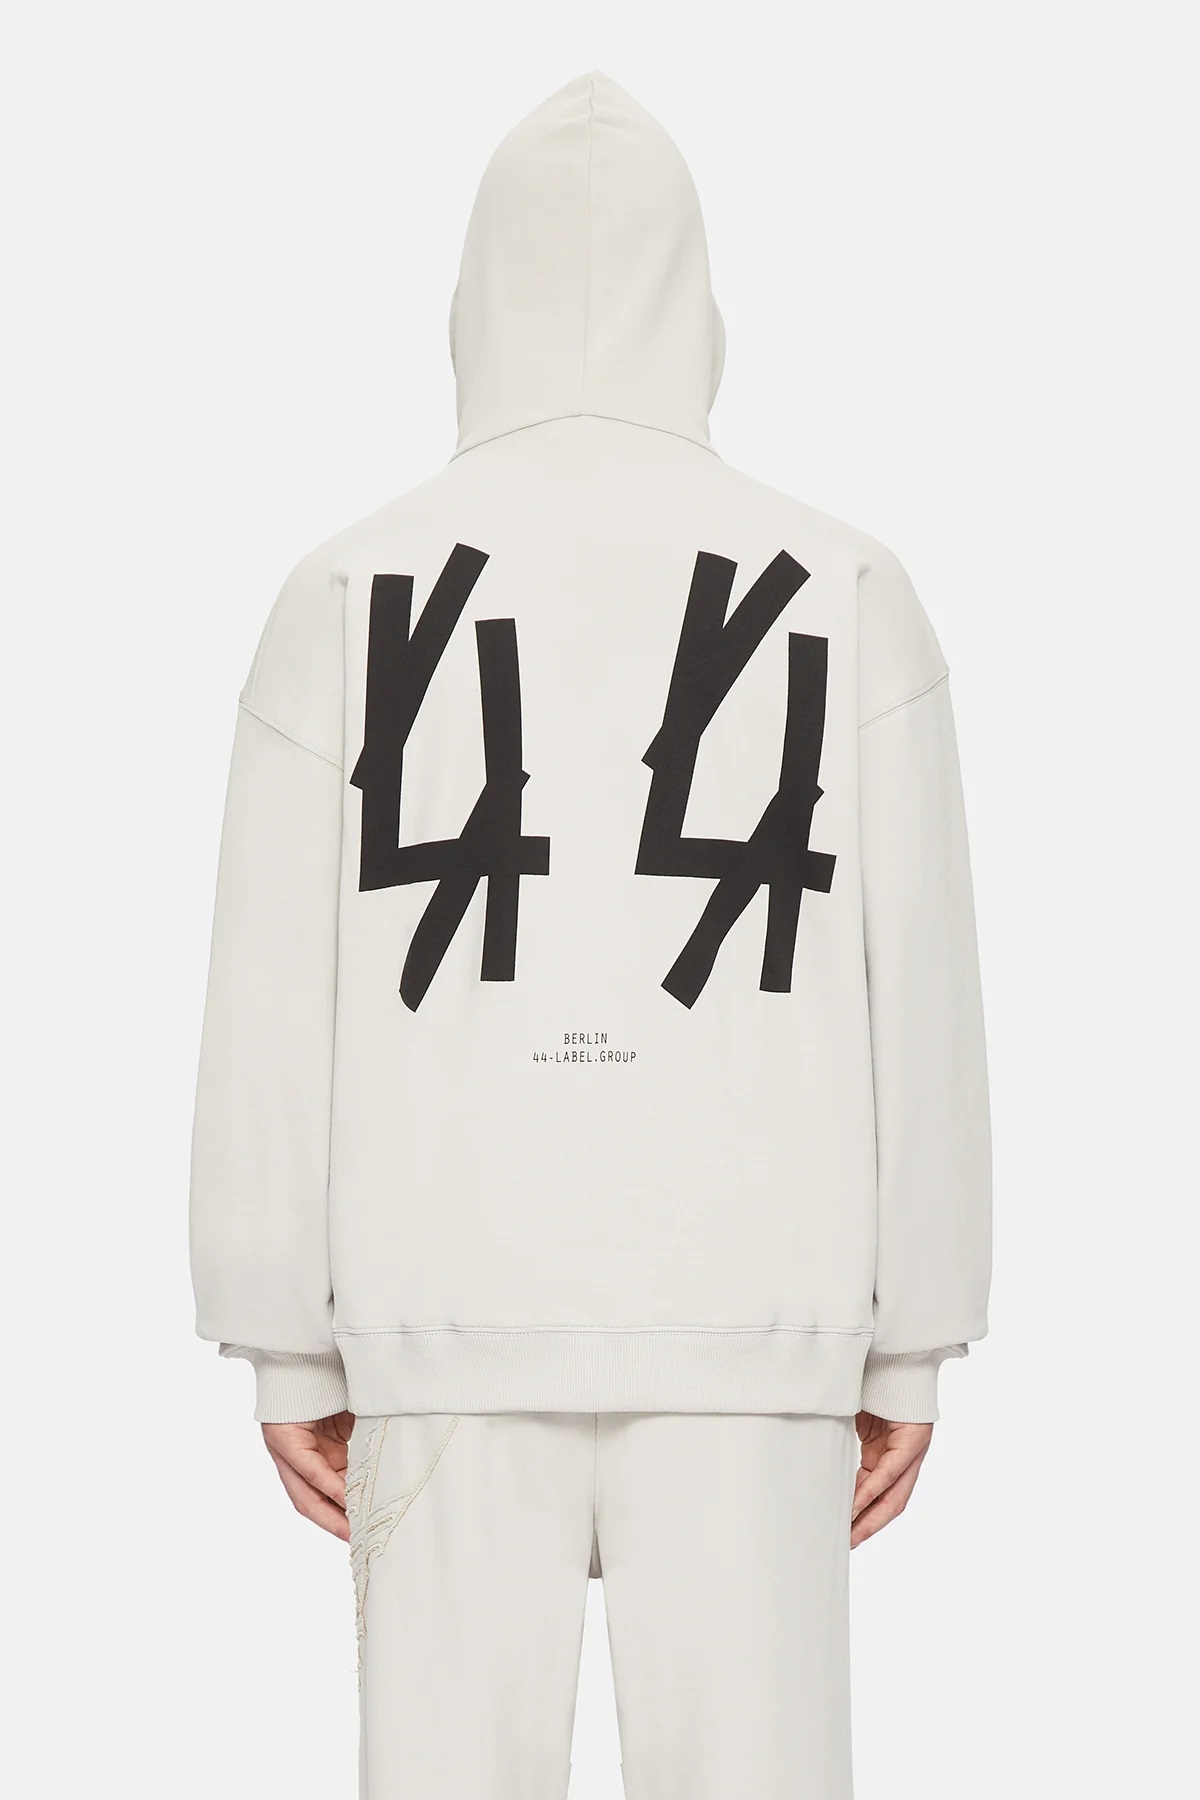 44 LABEL GROUP New Classic Hoodie in Dirty White/Black S